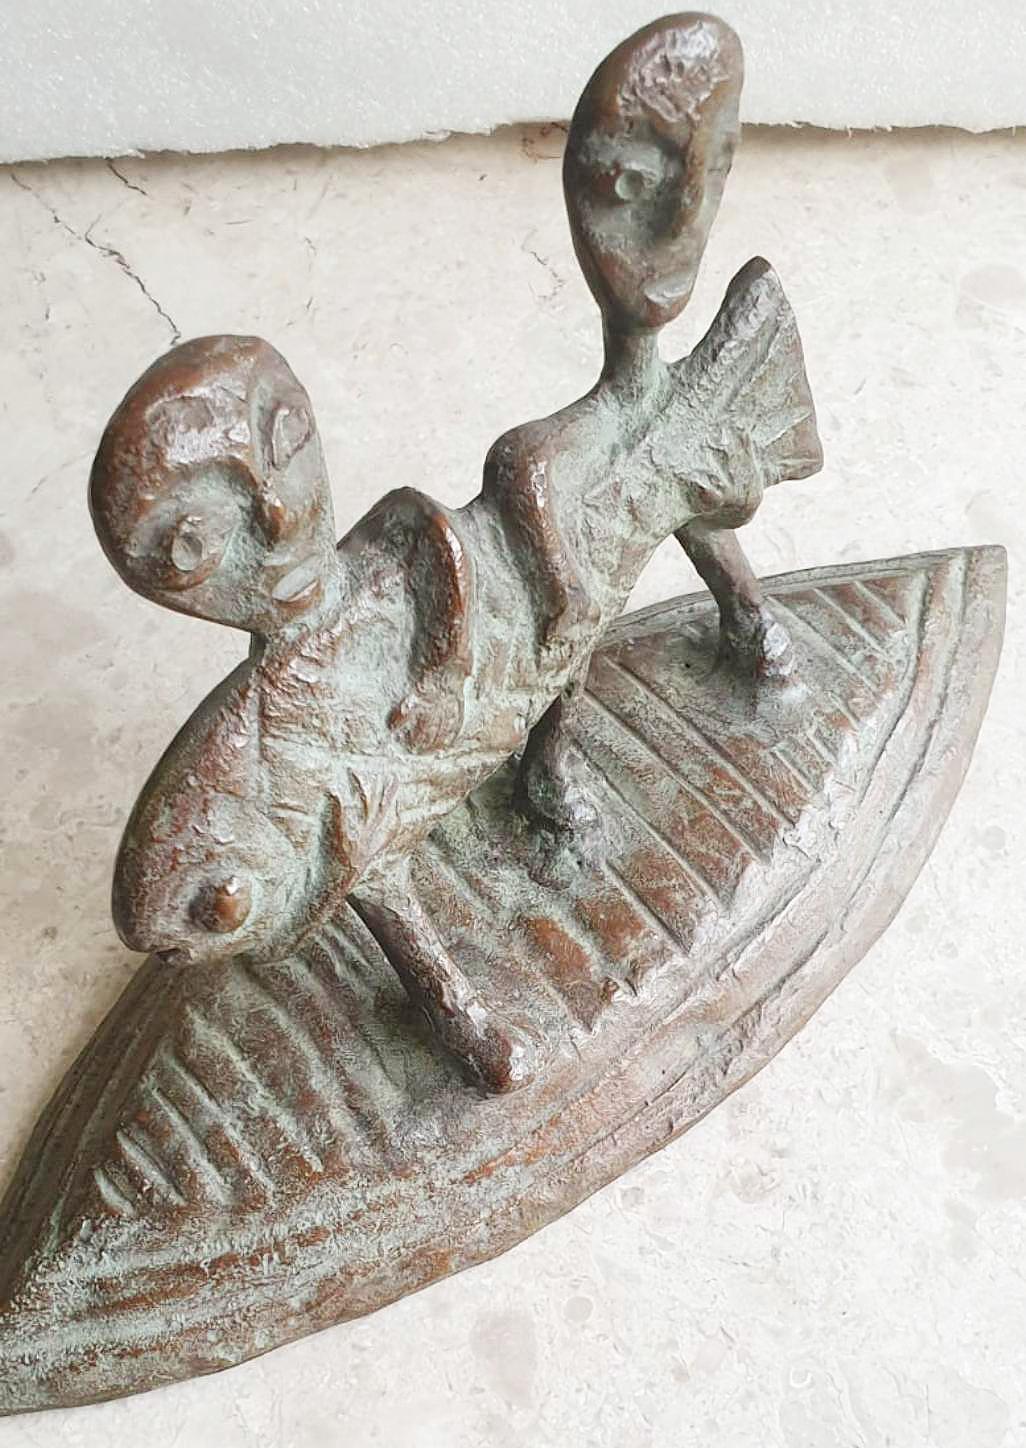 Subrata Biswas - Innocent Life
Bronze, H 6 x W 11 x D 4.75 inches

Style : The motive of a child in its most basic form appears quite repeatedly in the works of Subrata Biswas. The elementary human form representing the child complements innocence,